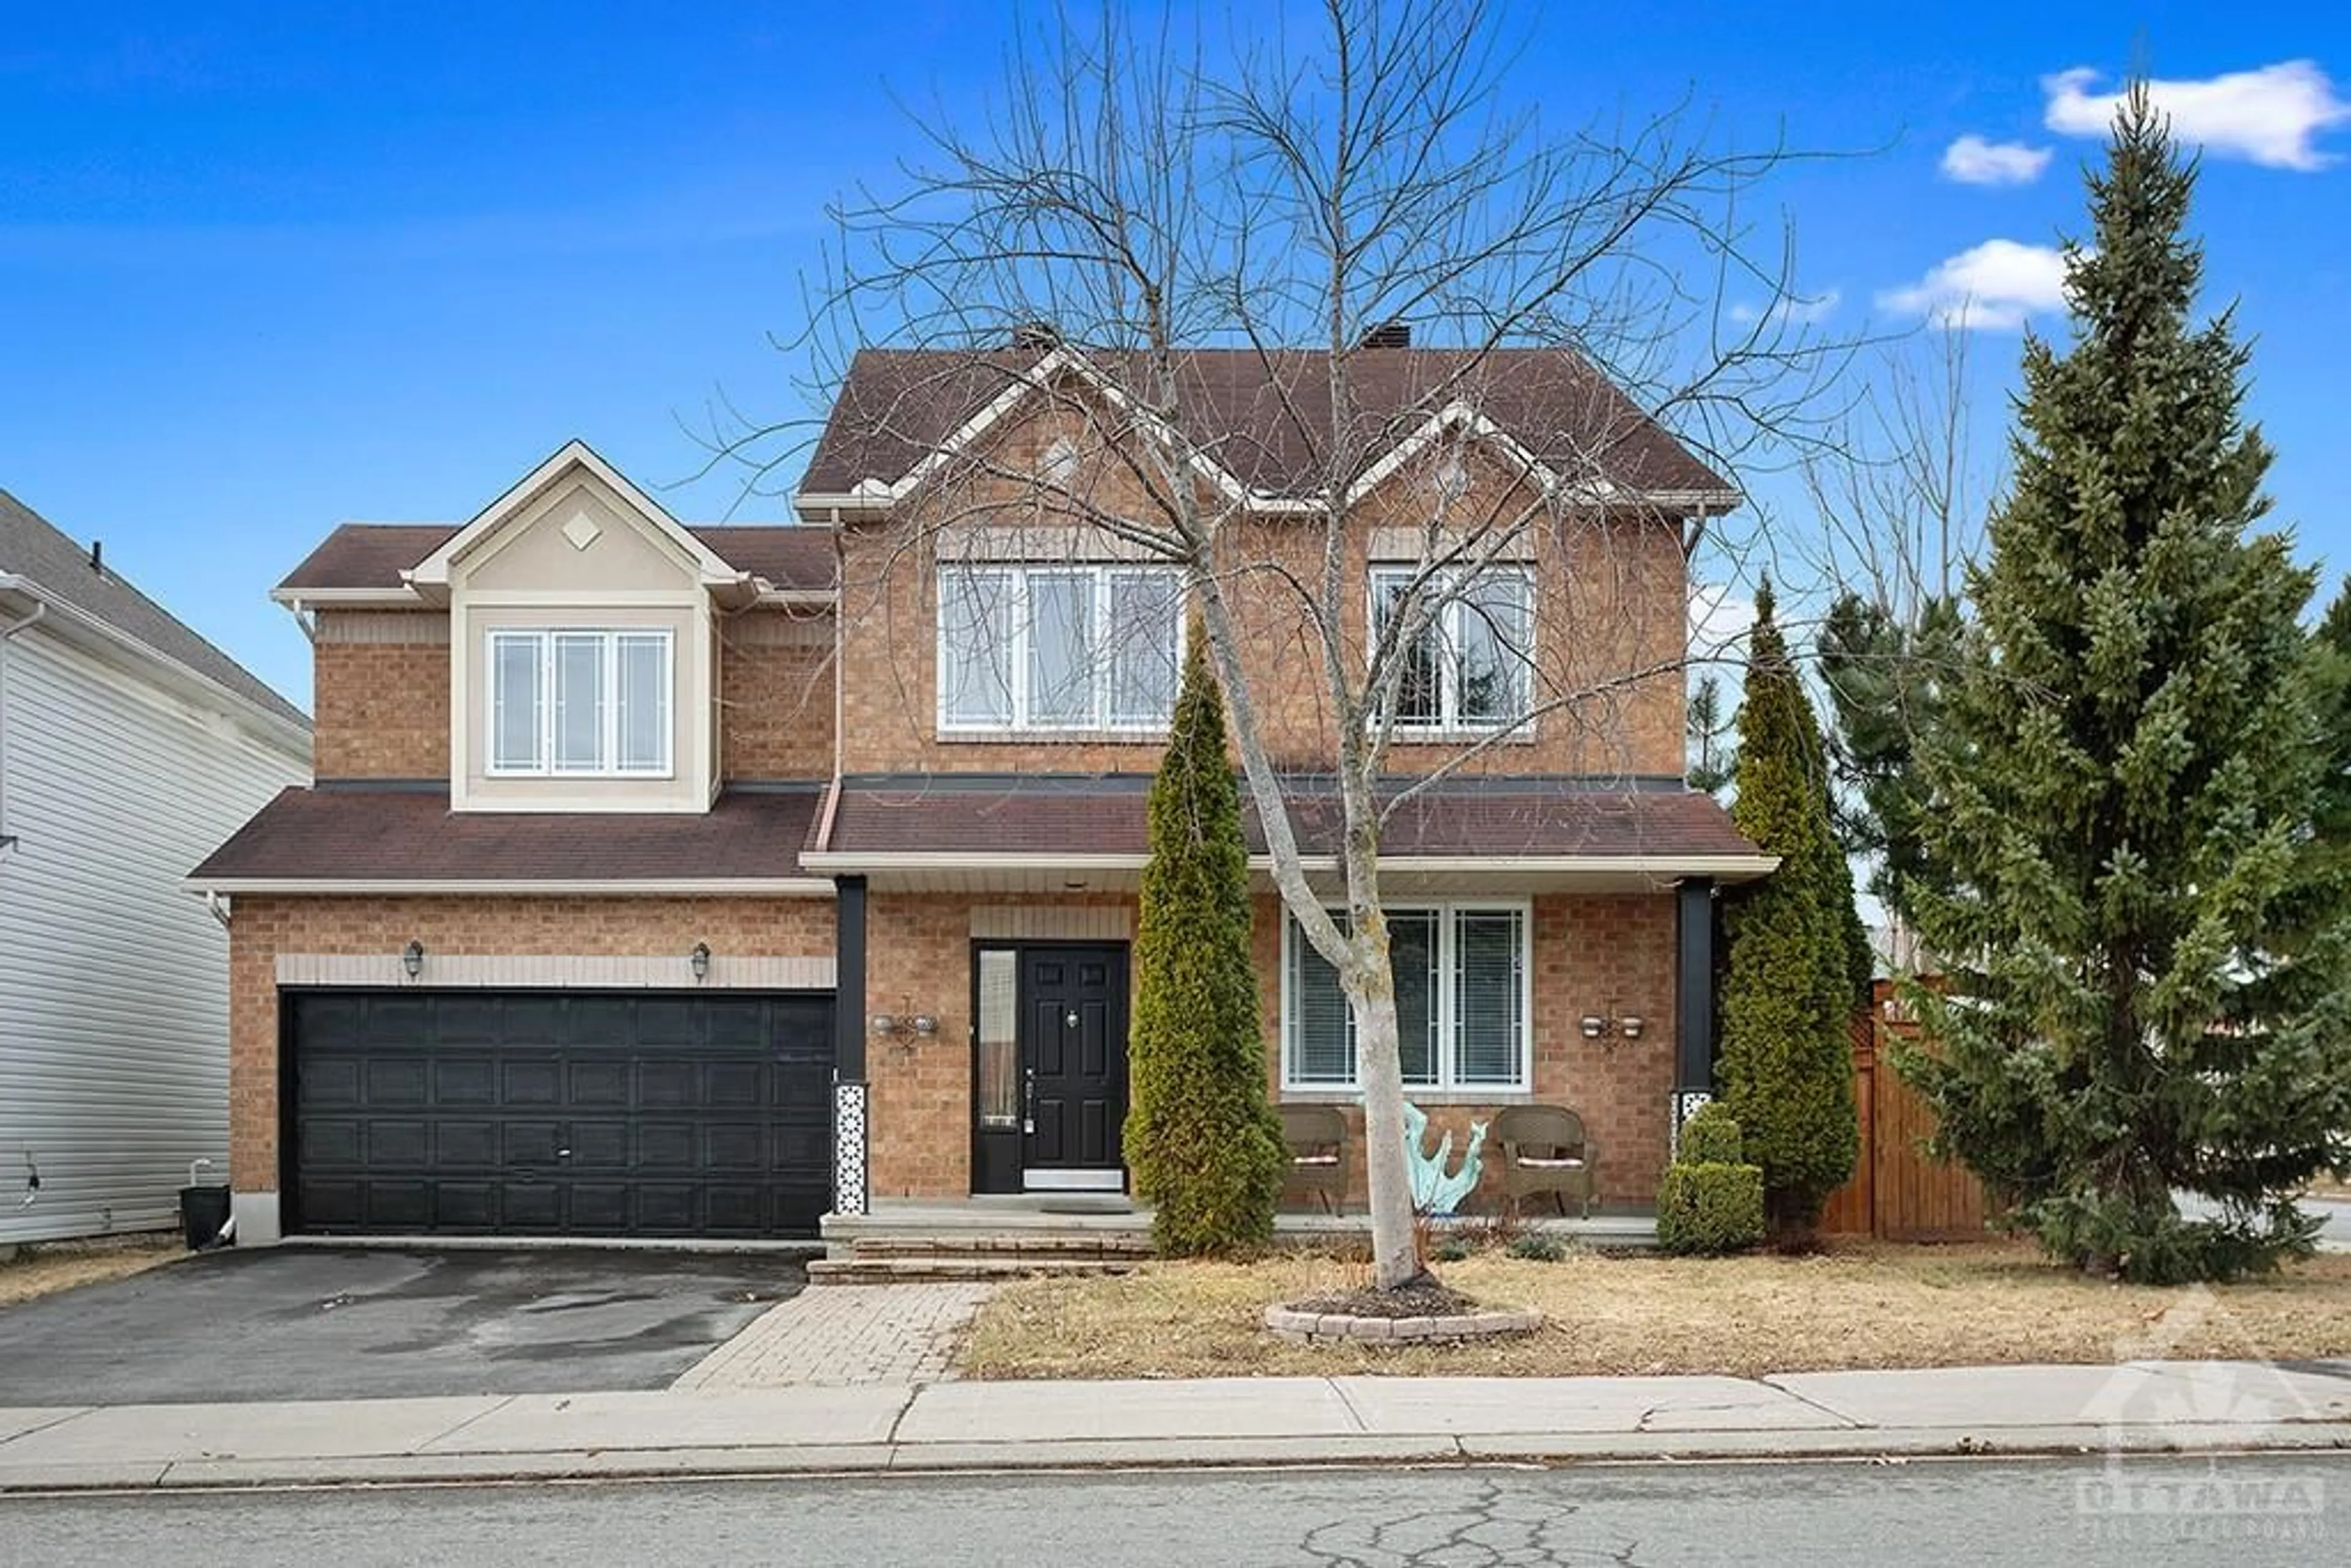 Home with brick exterior material for 120 ROCKY HILL Dr, Barrhaven Ontario K2G 7B2